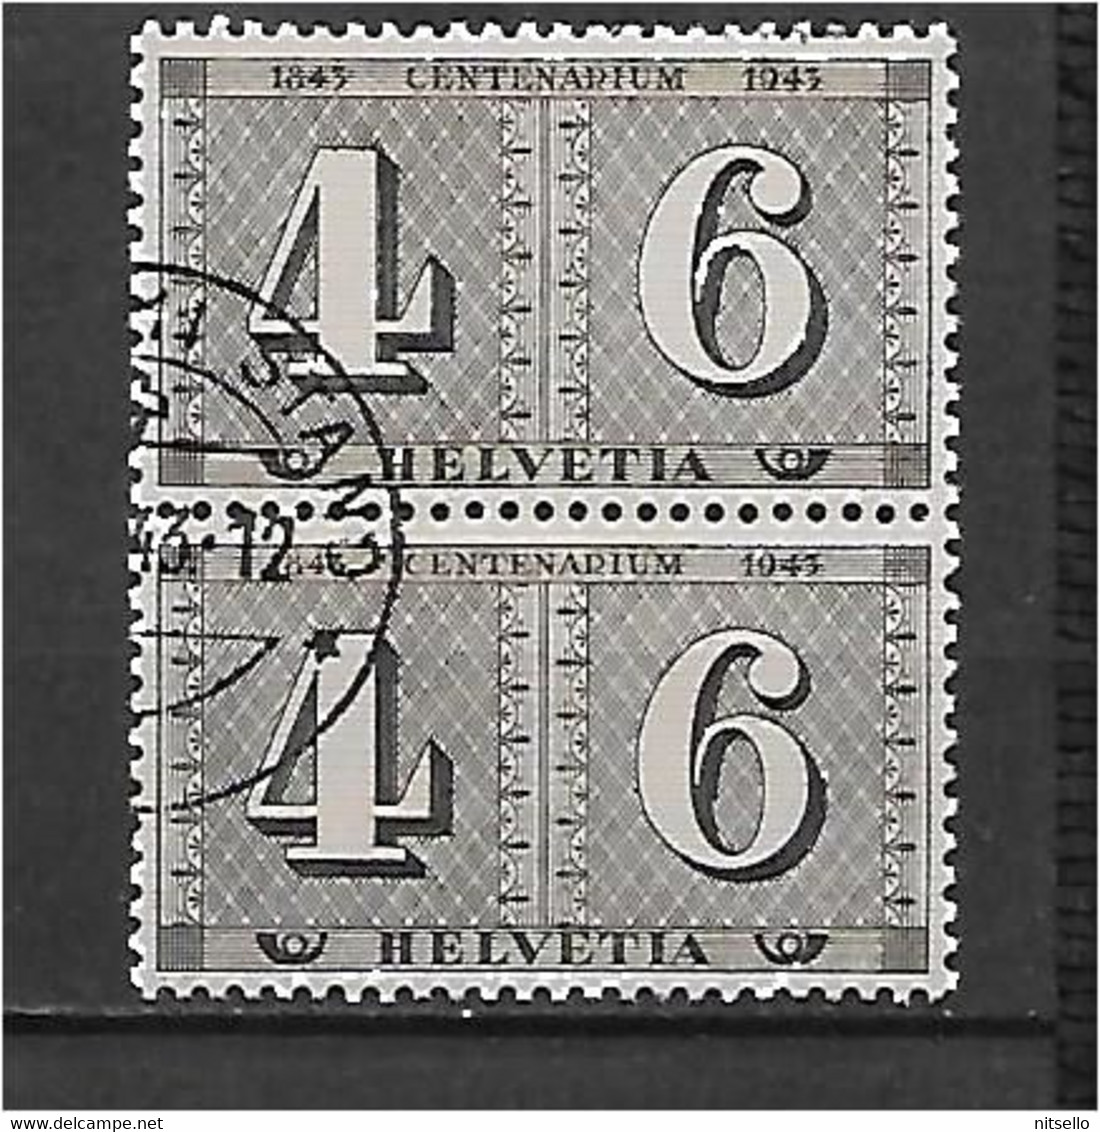 LOTE 1583  /// SUIZA   YVERT Nº: 384  ¡¡¡ OFERTA - LIQUIDATION - JE LIQUIDE !!! - Used Stamps